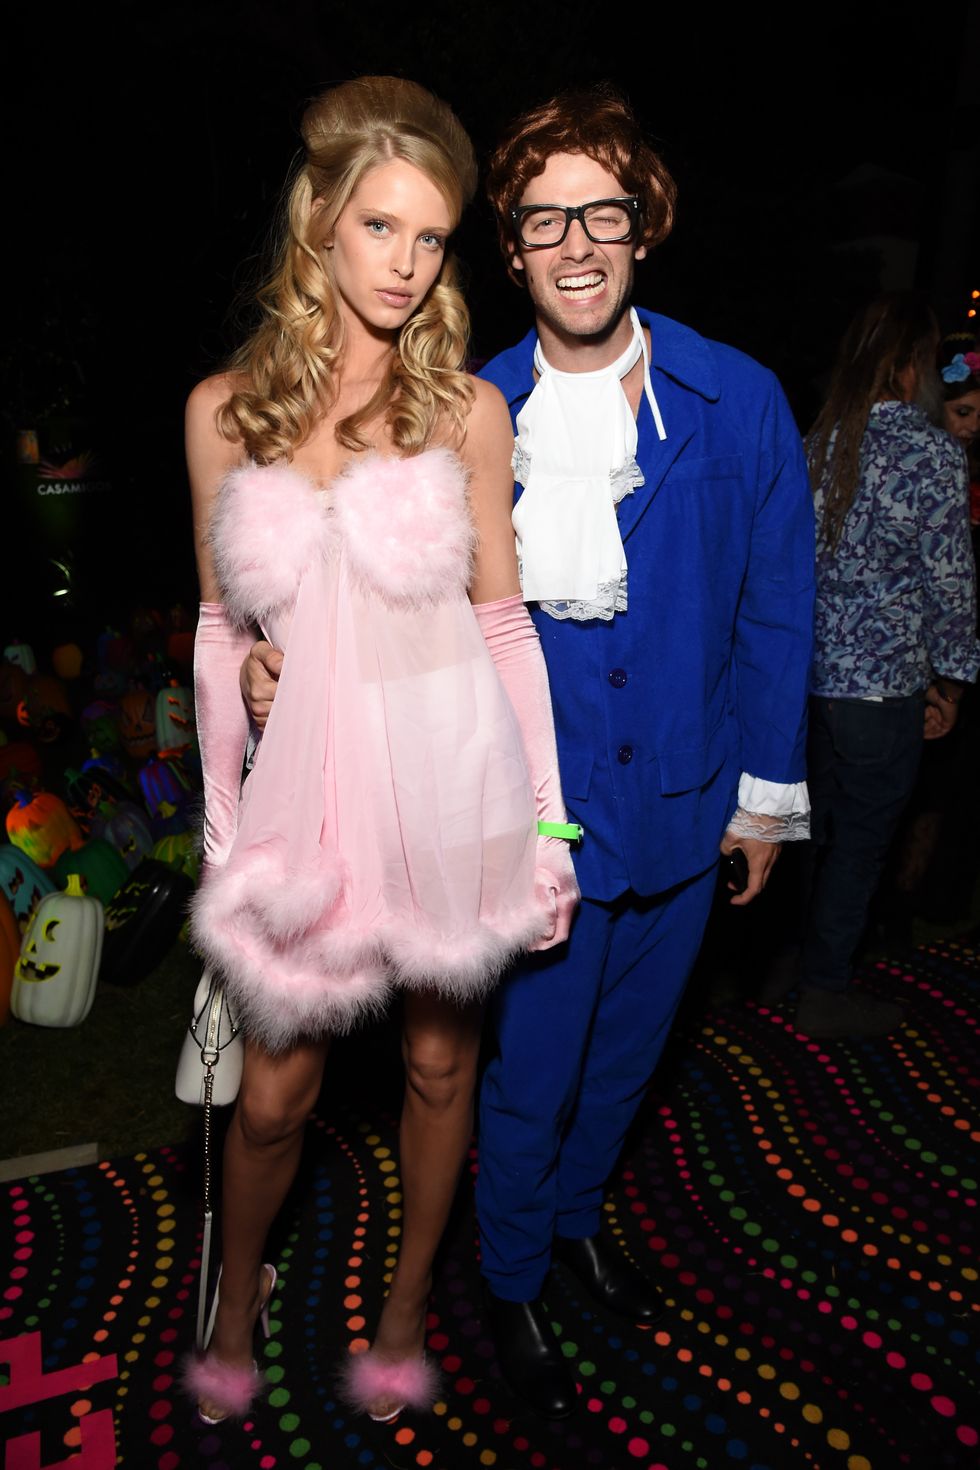 beverly hills, california october 25 l r abby champion and patrick schwarzenegger attend the 2019 casamigos halloween party on october 25, 2019 at a private residence in beverly hills, california photo by michael kovacgetty images for casamigos